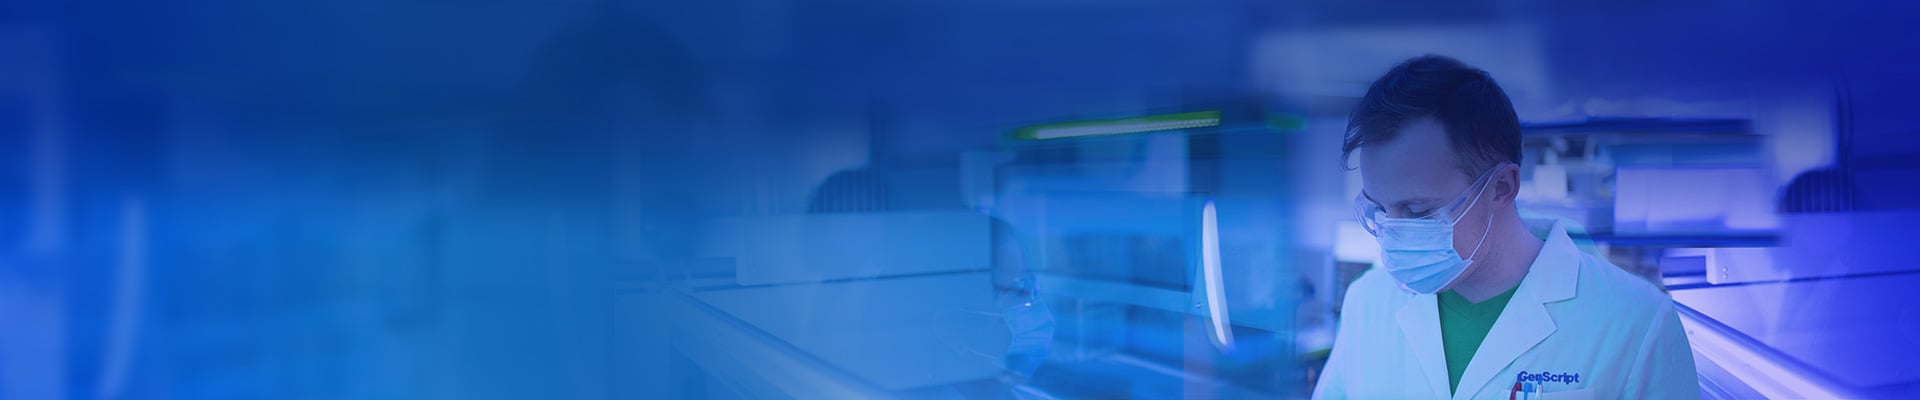 Gene Synthesis & DNA Synthesis Services Banner